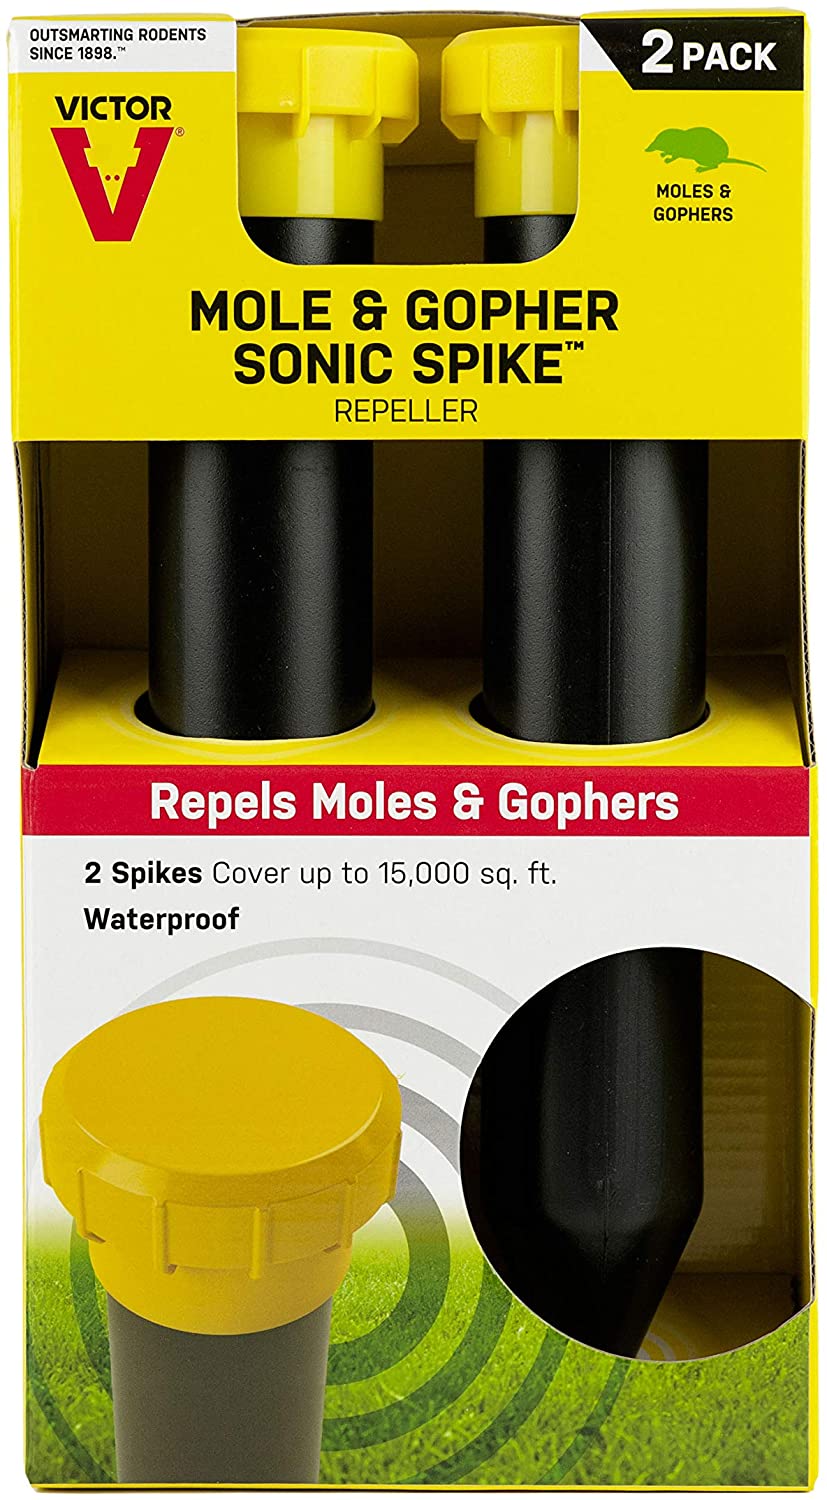 Victor's Mole and Gopher Twin Pack Sonic Spikes